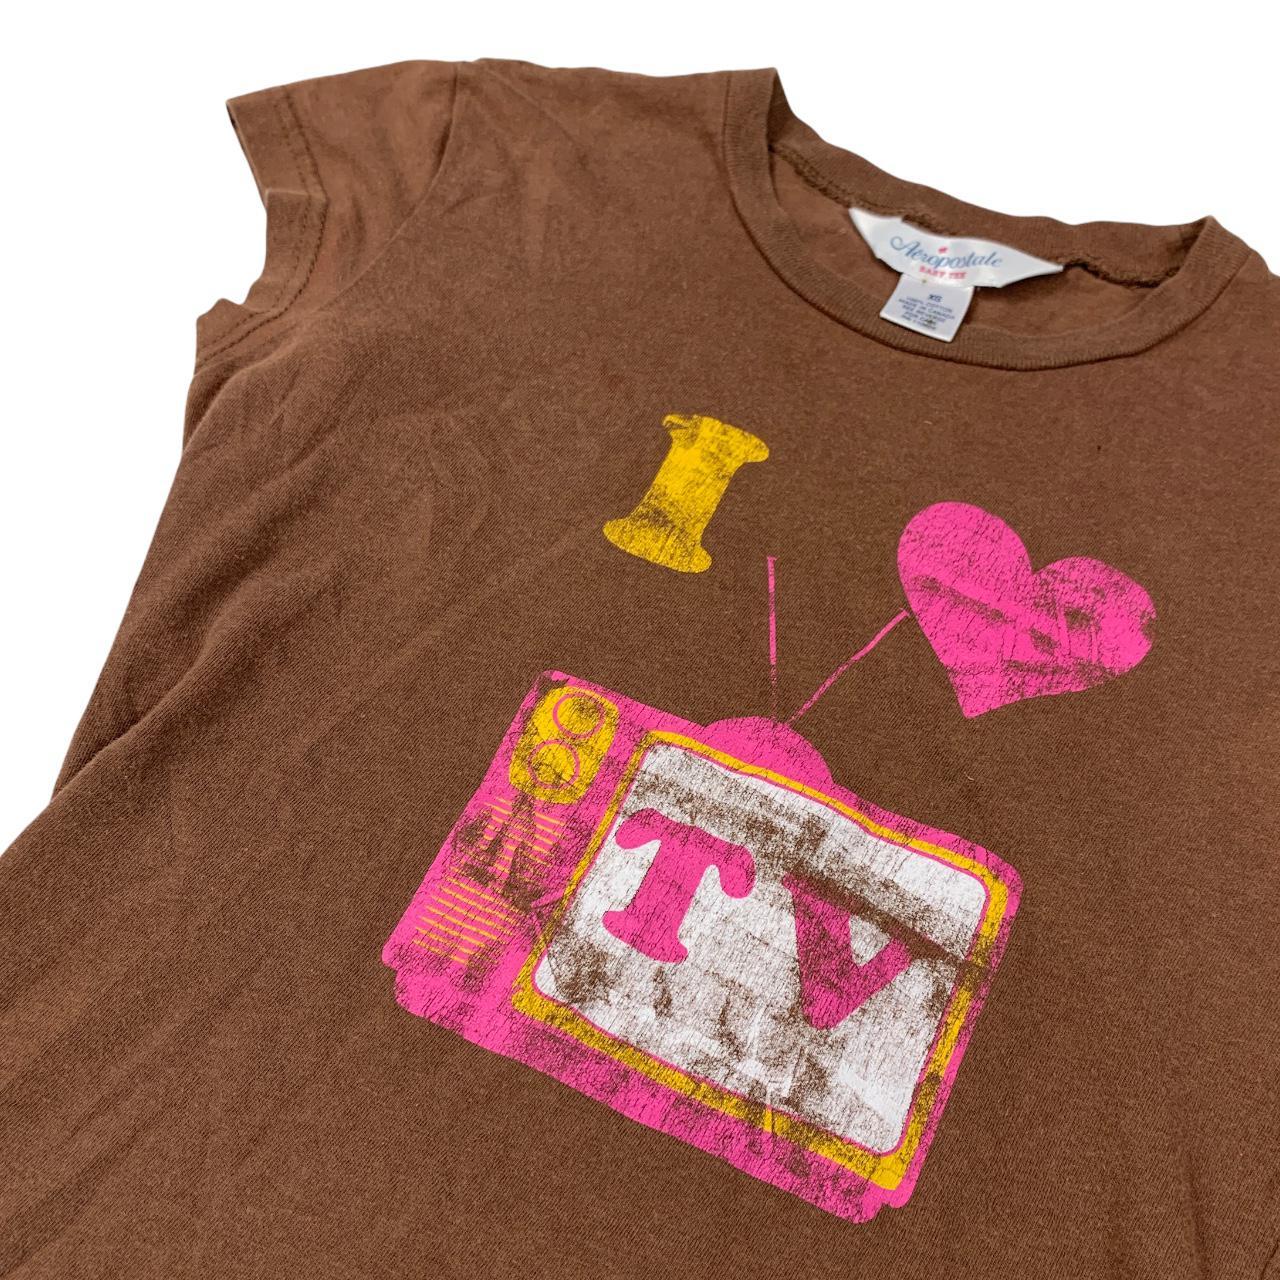 Product Image 2 - I HEART TV TEE

This y2k